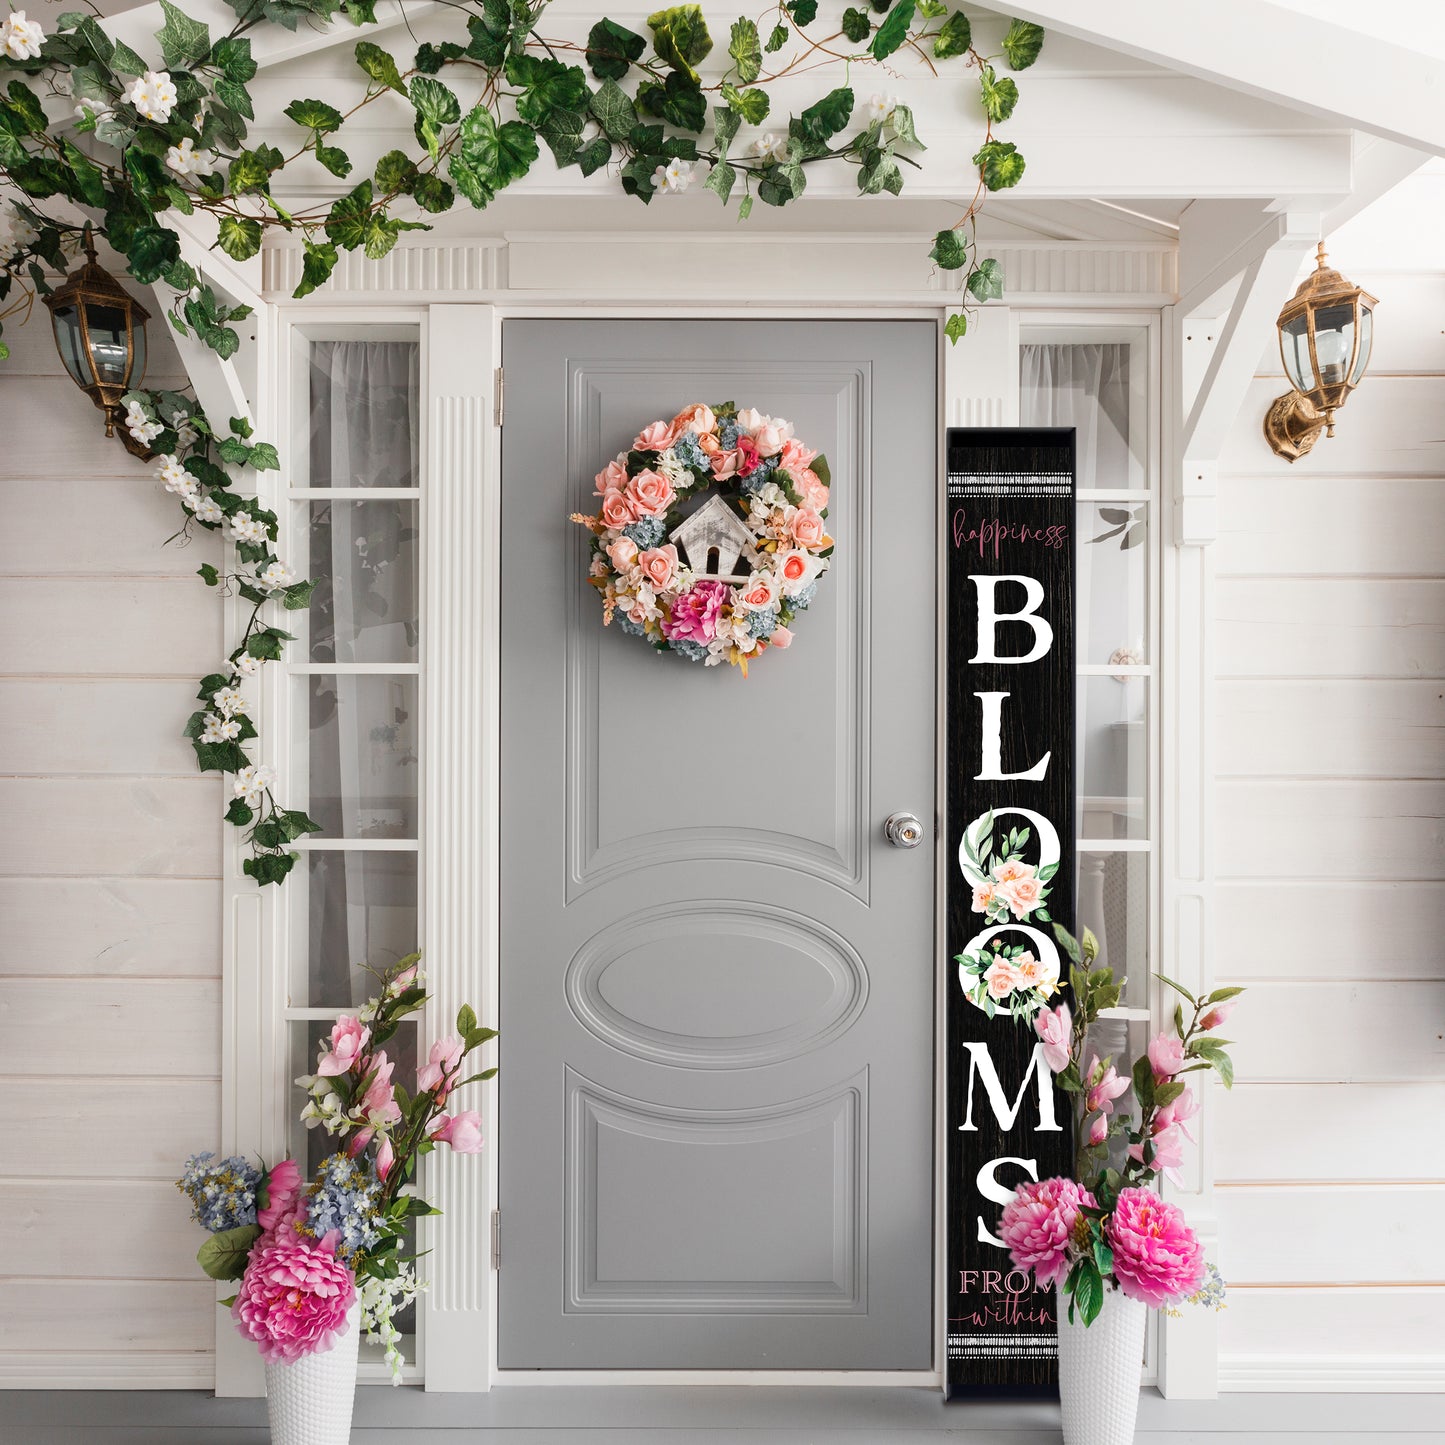 72in Spring Happiness Blooms From Within Outdoor Porch Sign - Black, Front Porch Decor, Home Decor Indoor Outdoor Wood Sign